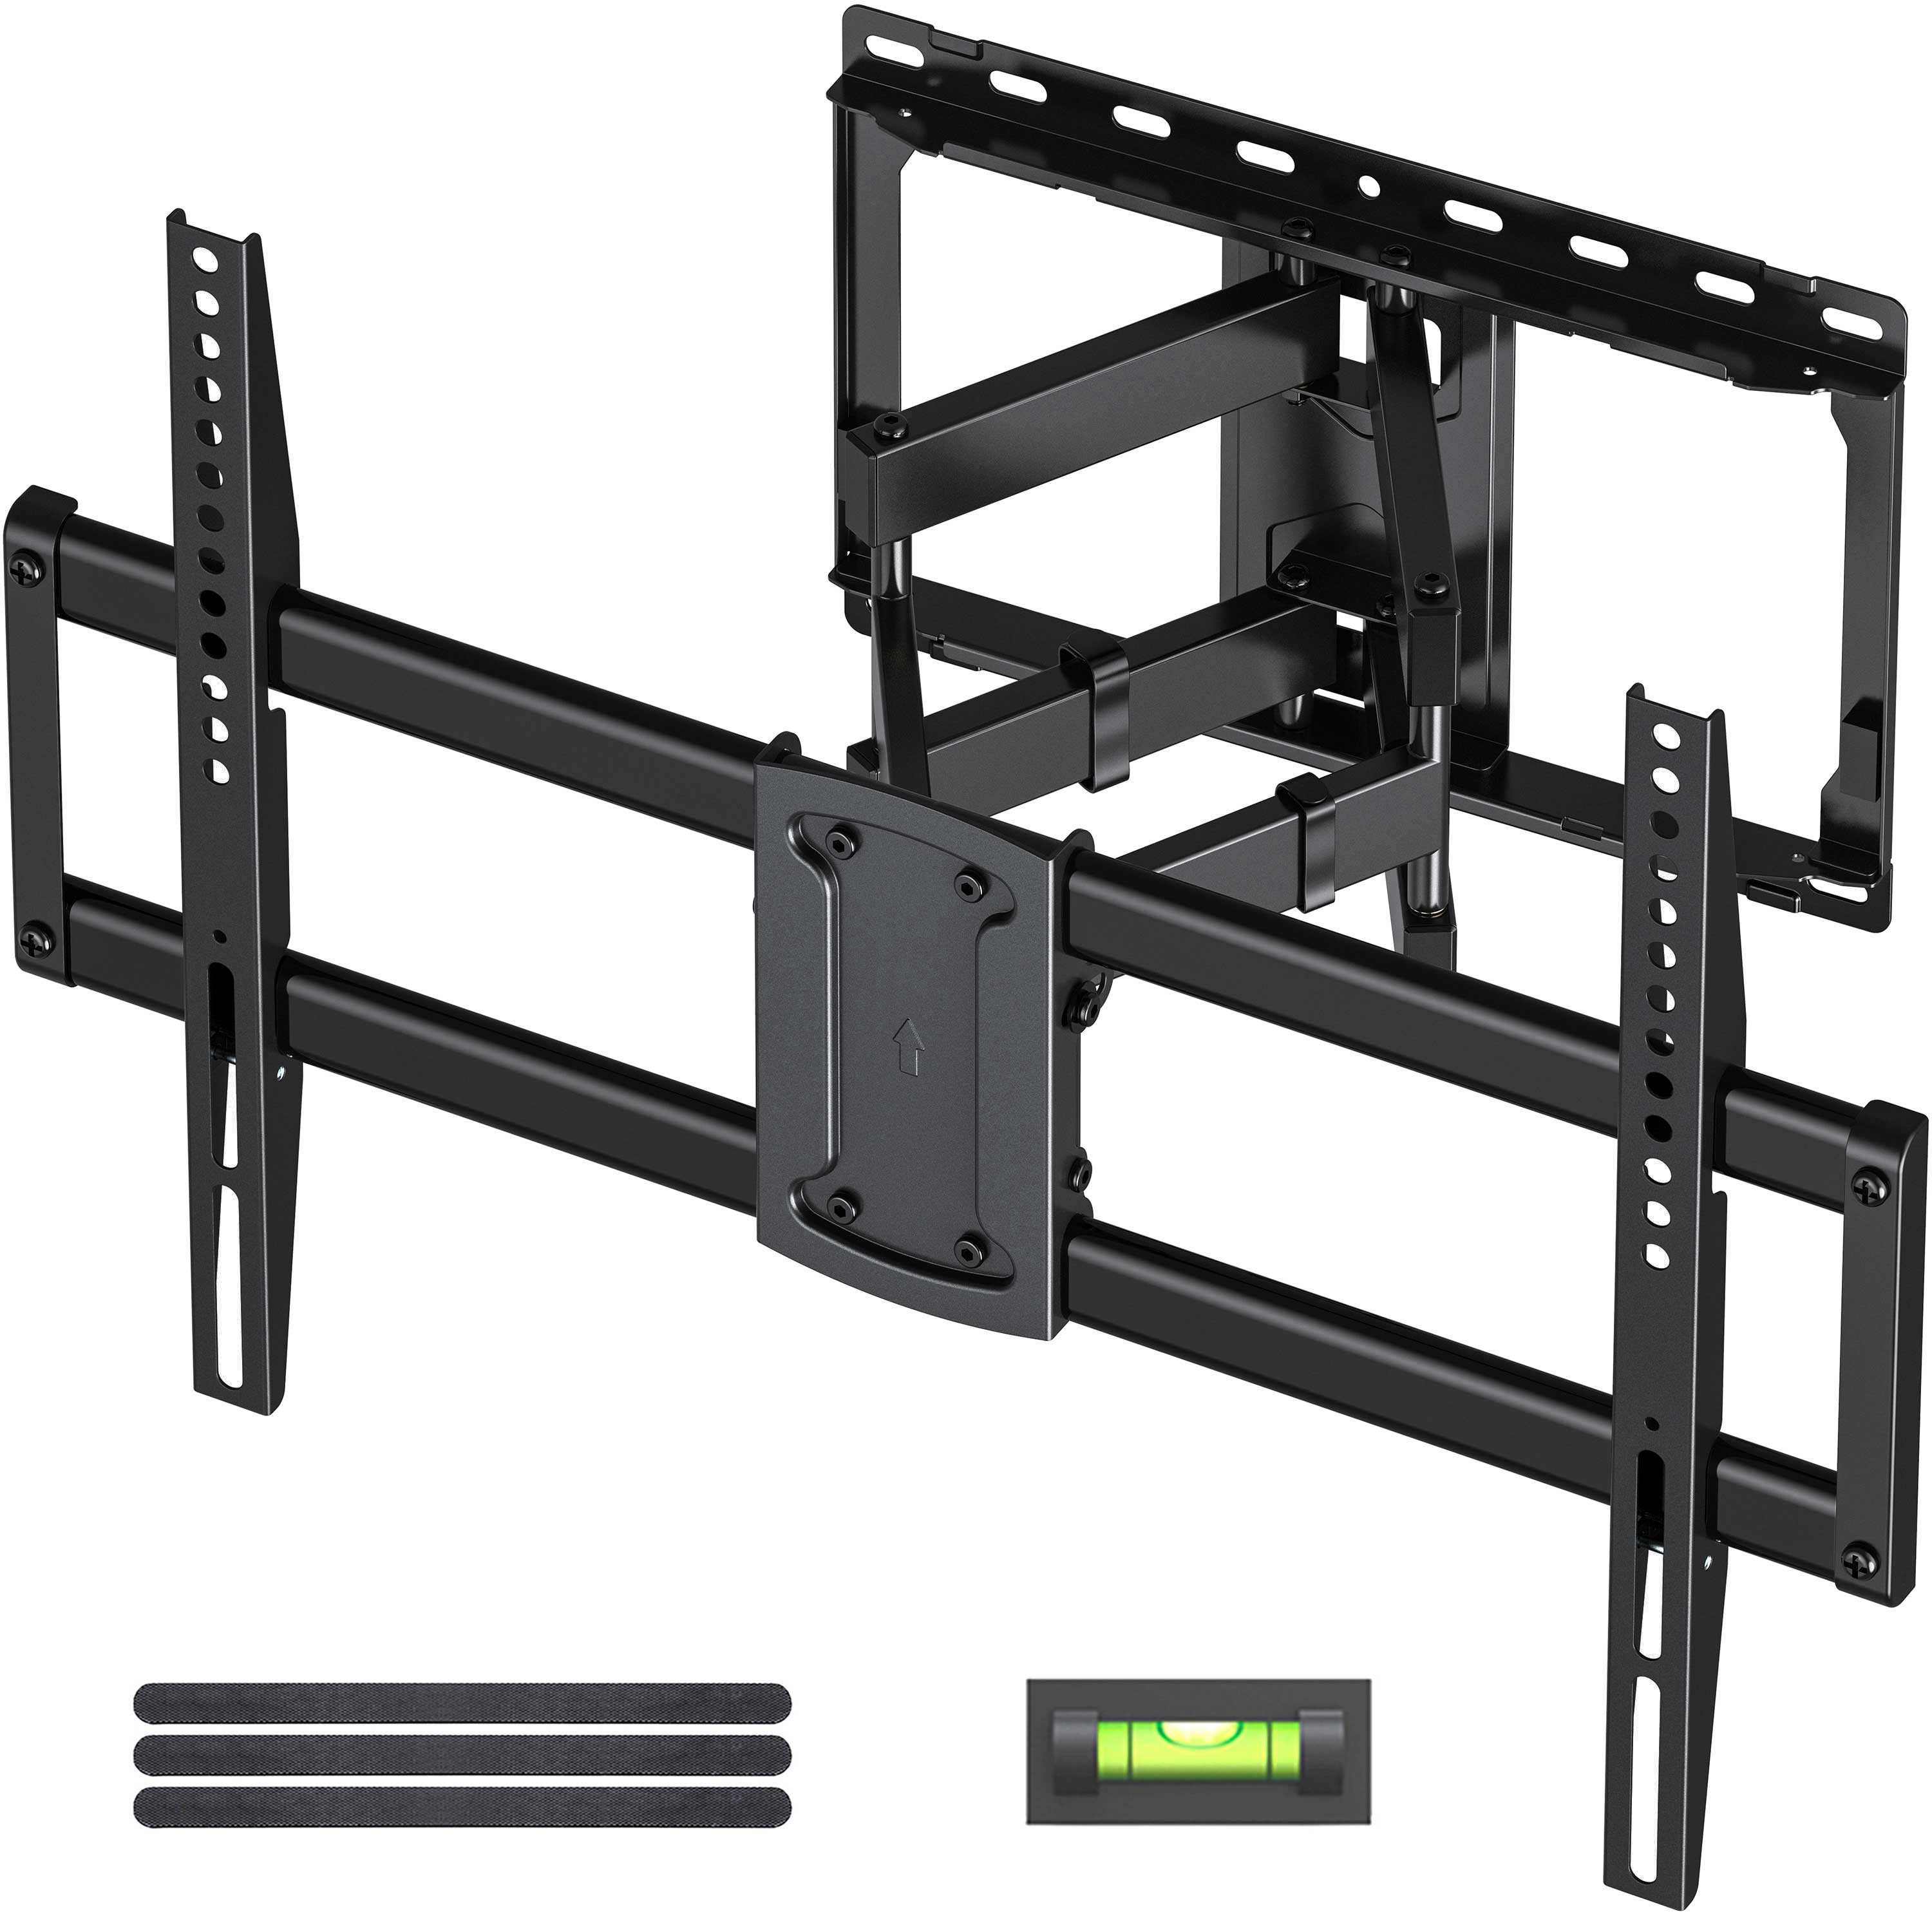 USX MOUNT Full Motion TV Wall Mount for 47-90 inch TVs Universal Swivels Tilts Extension Leveling Hold up to 132lb Max VESA 600x400mm, 16" Wood Stud - image 1 of 9